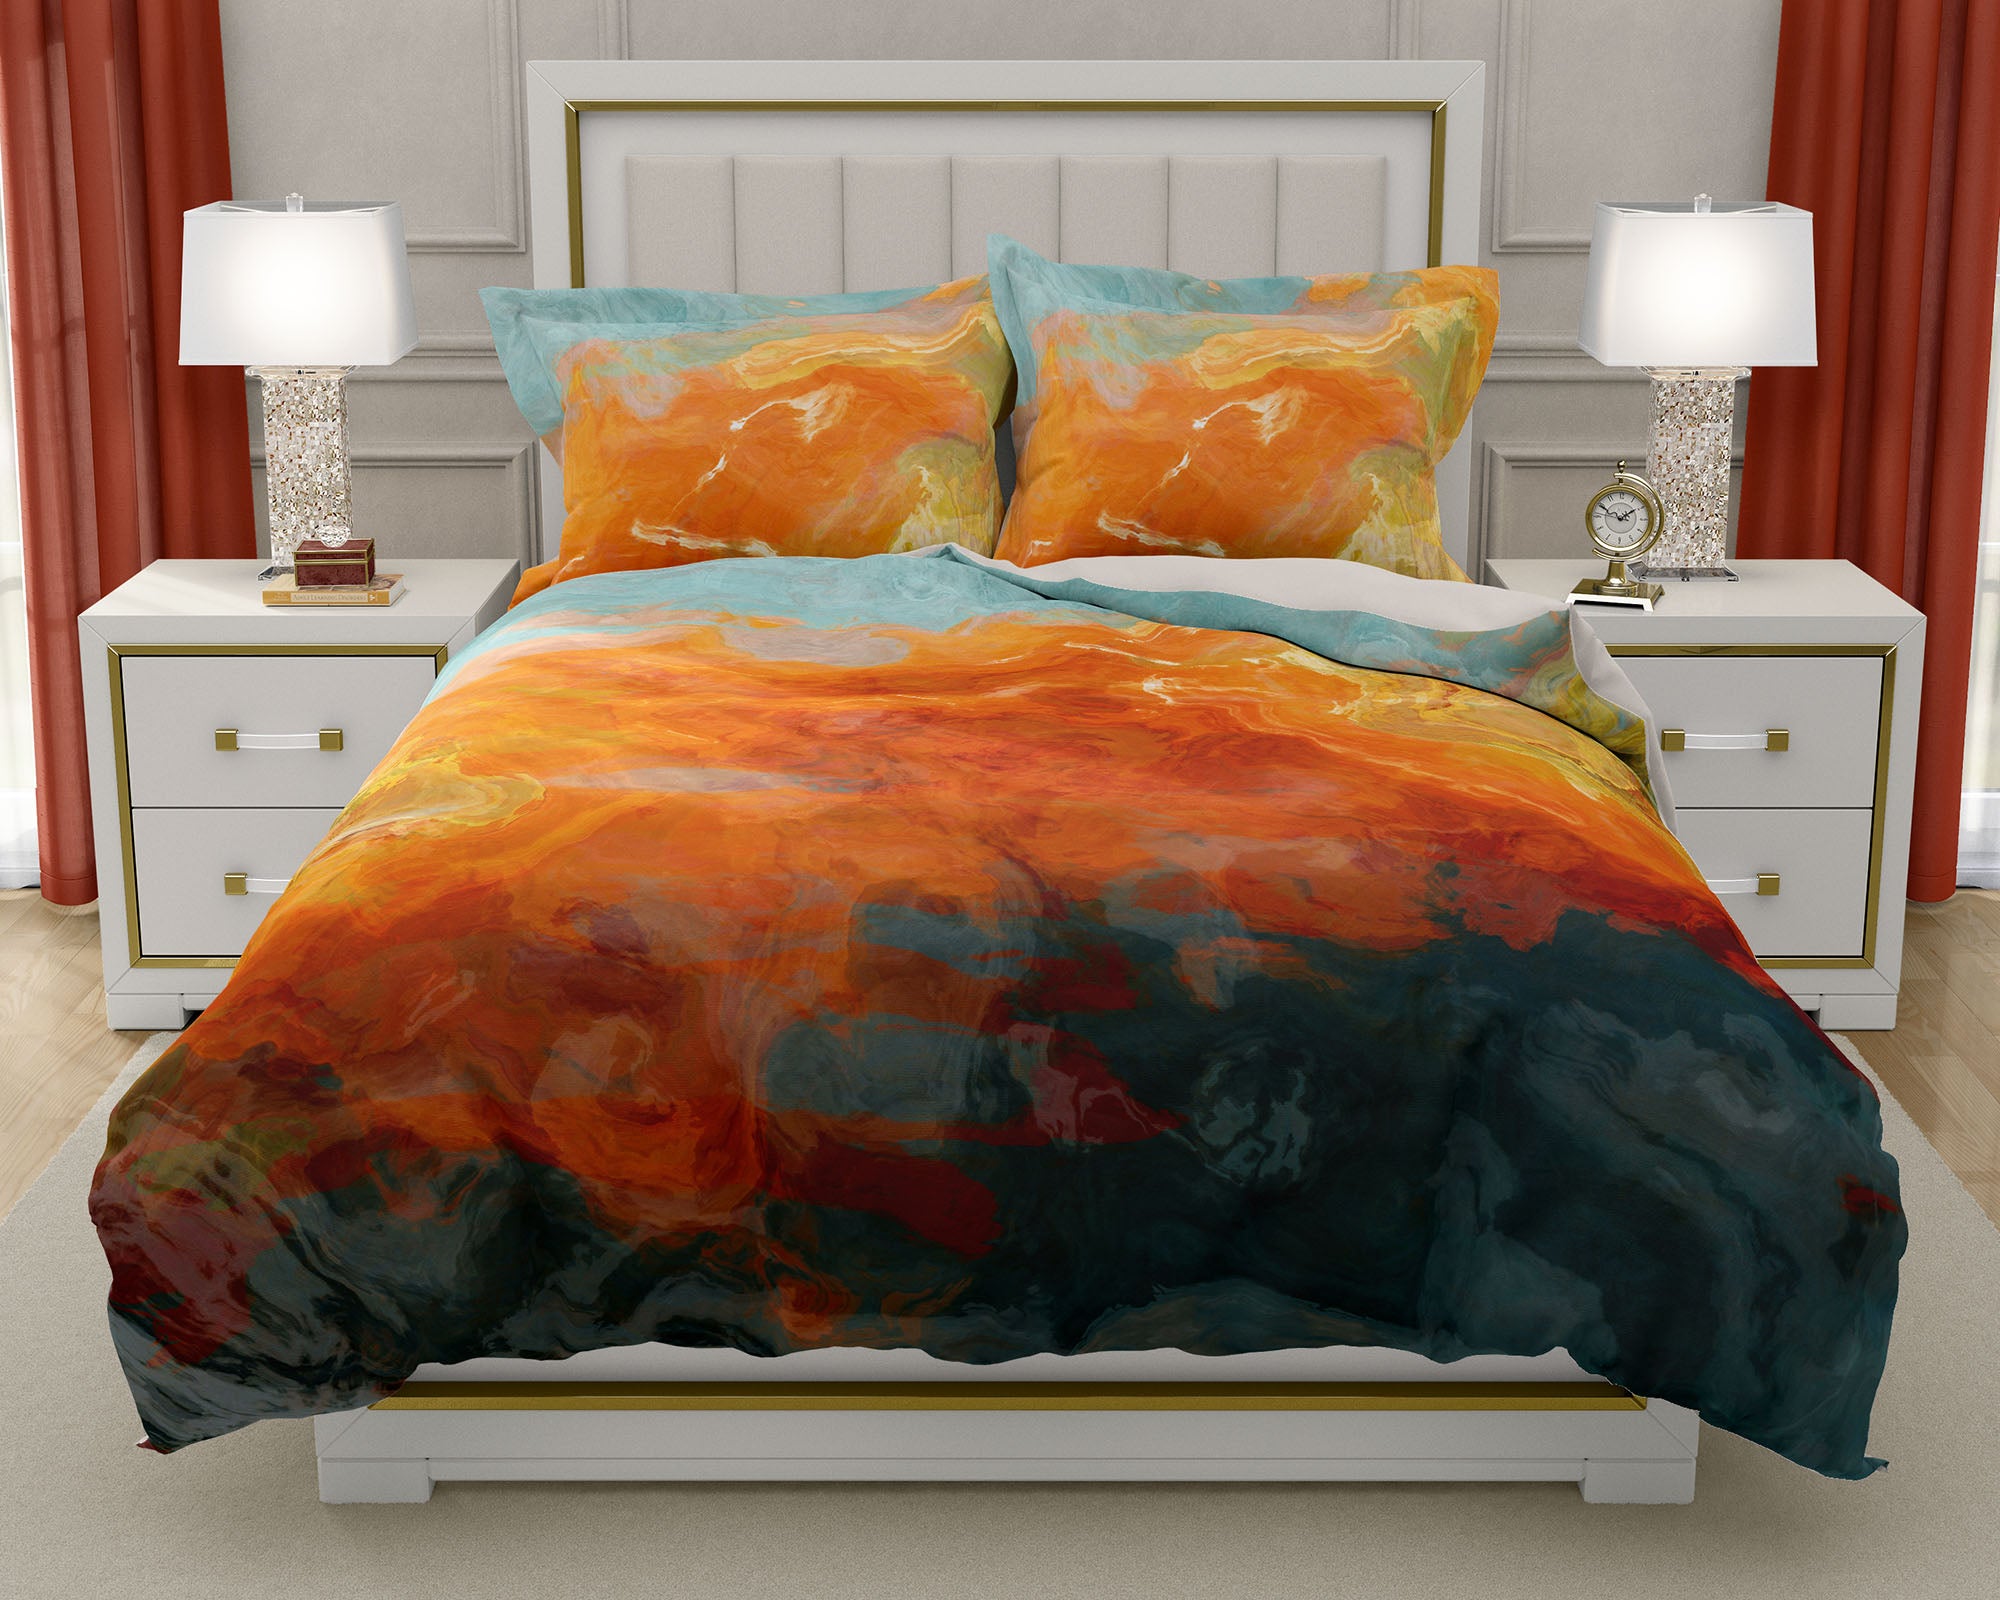 Duvet Cover with abstract art, king or queen in orange, yellow teal –  Abstract Art Home